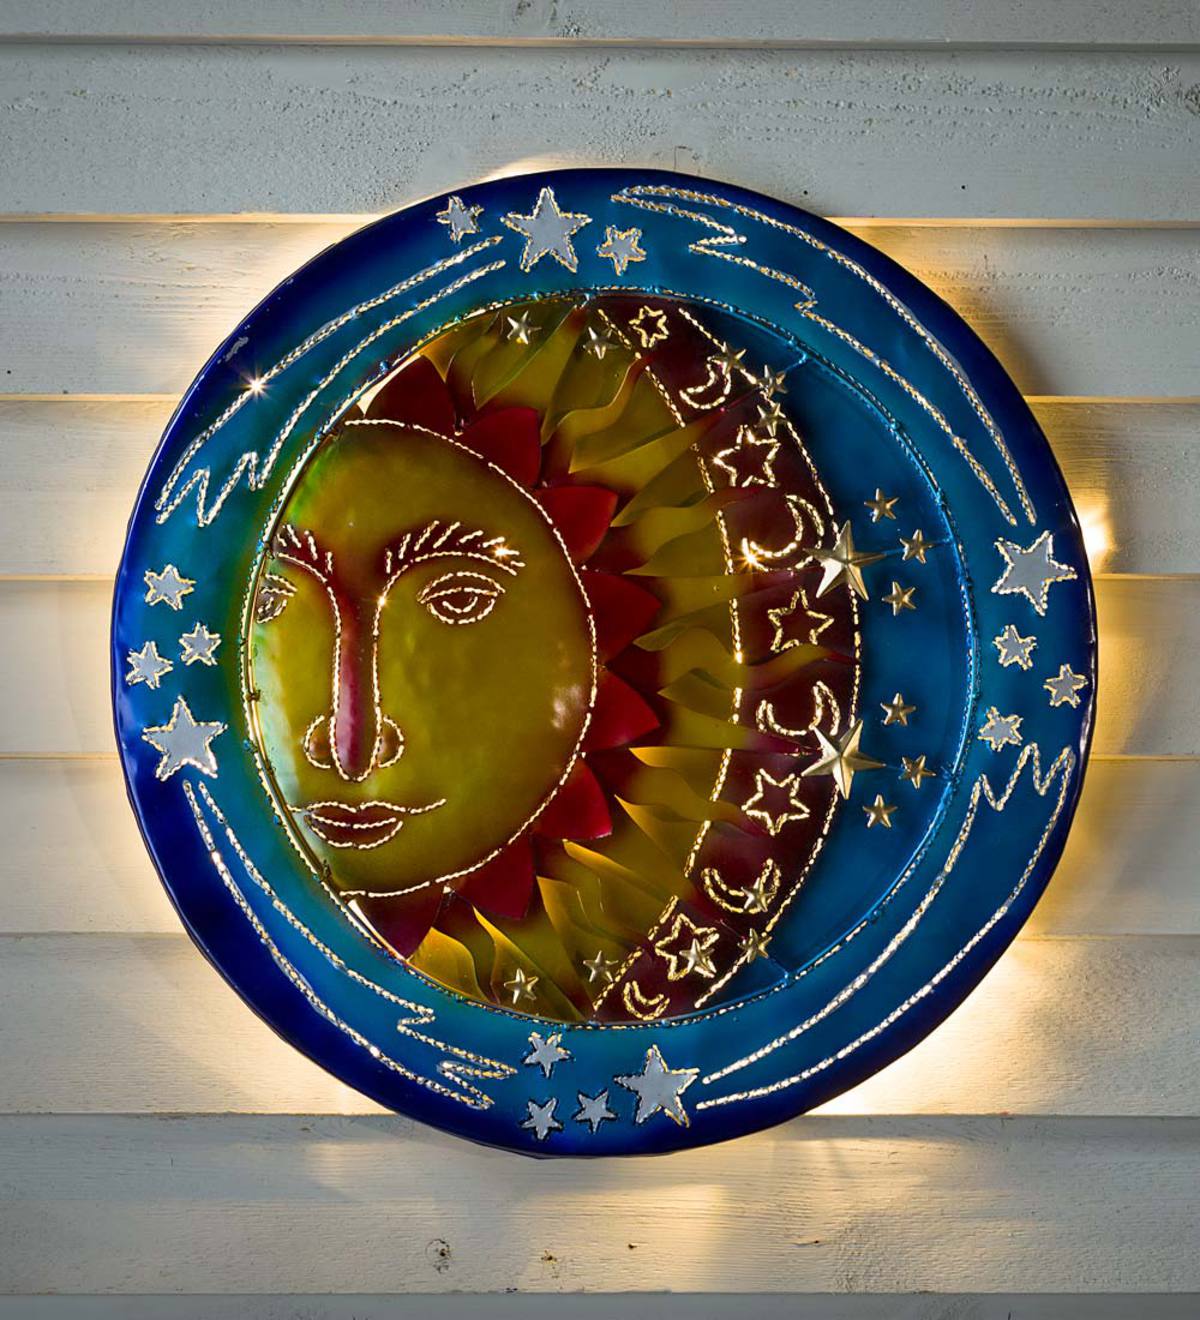 3D Lighted Celestial Recycled Oil Drum Lid Wall Art